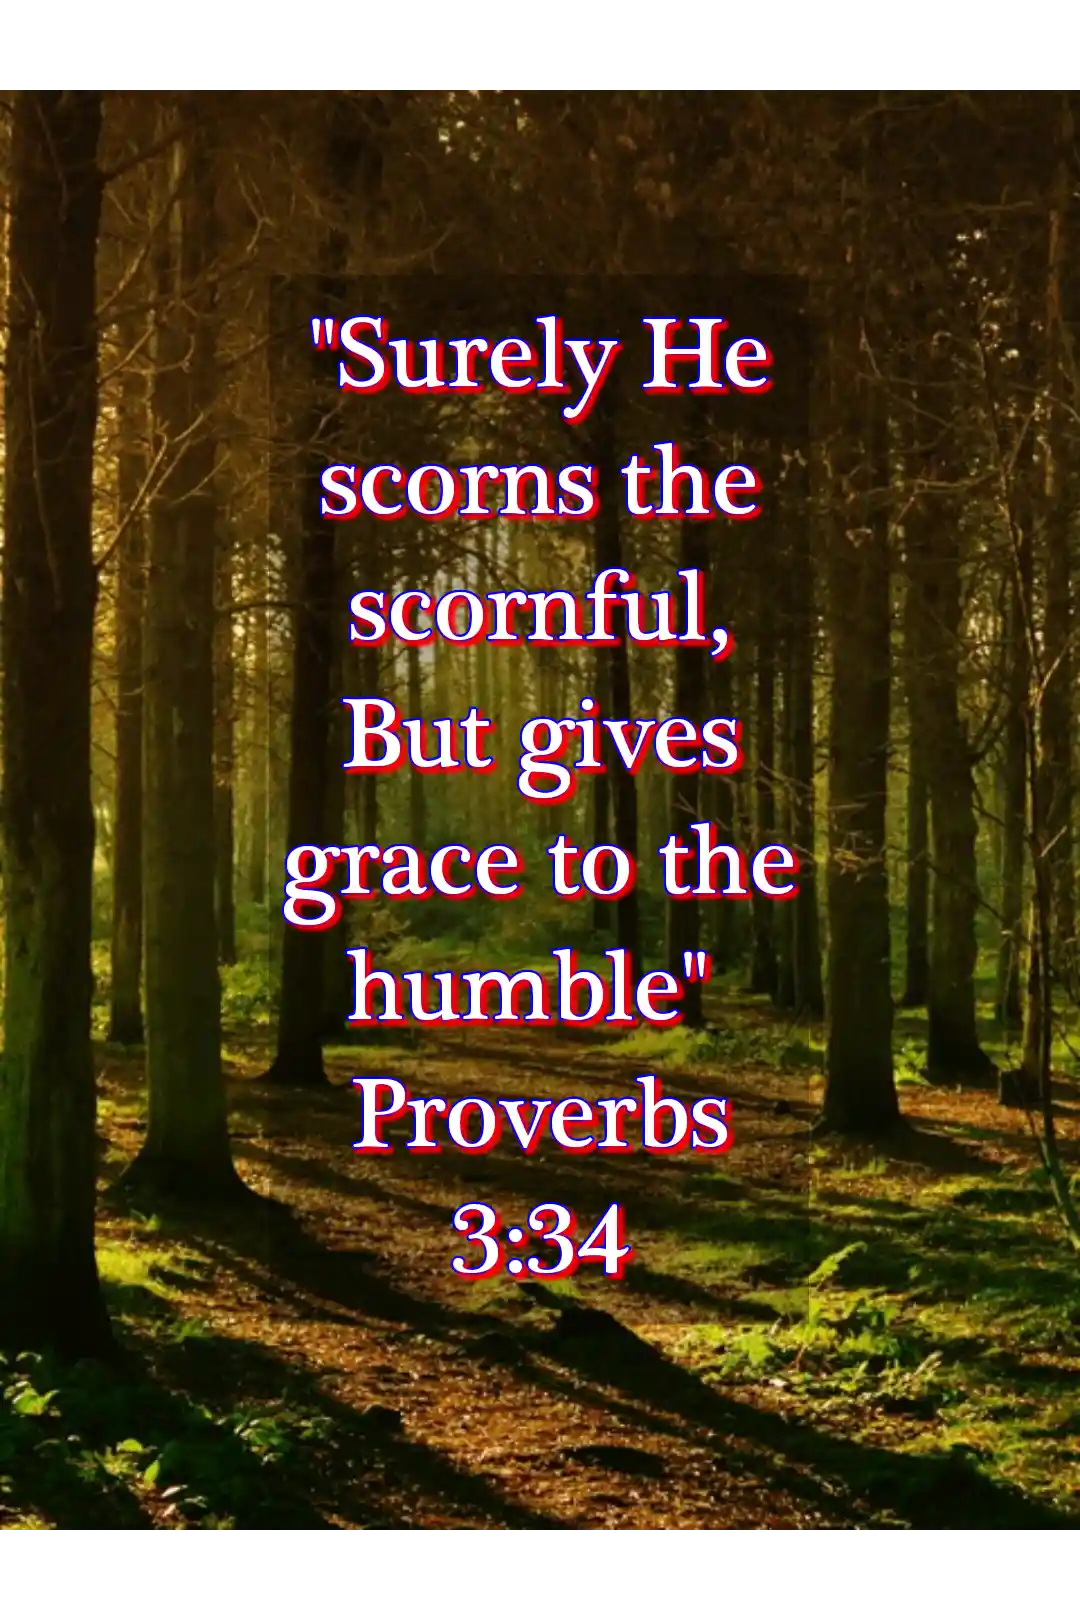 bible verses about humble (Proverbs 3:34)